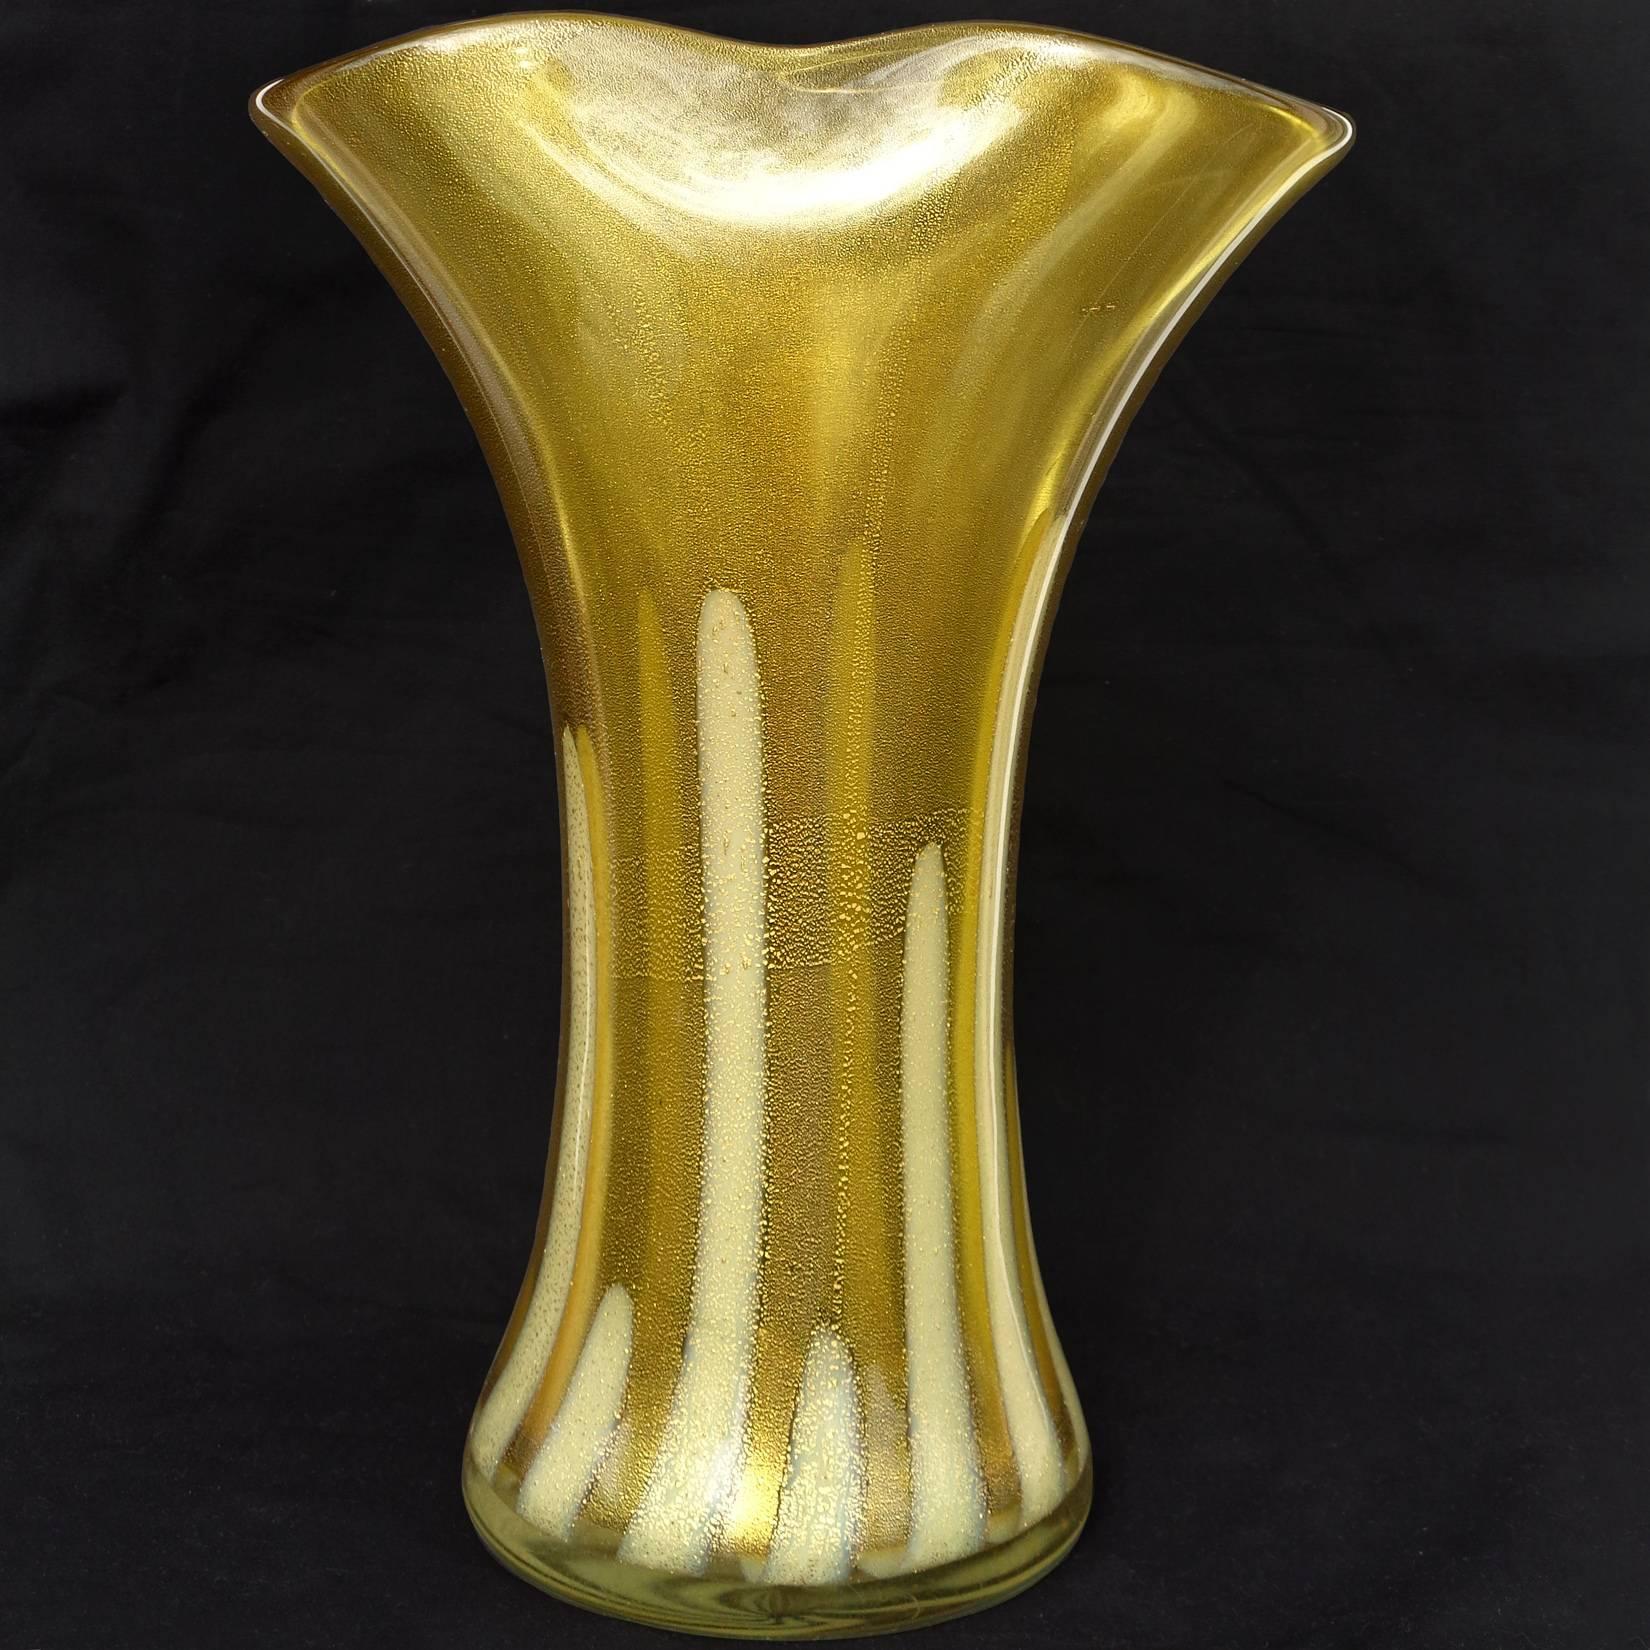 Beautiful large Murano hand blown olive green, white stripes and gold flecks art glass flower vase. Attributed to designer Alfredo Barbini. The piece has a pinched rim, and profusely covered in gold leaf. Measures: 12